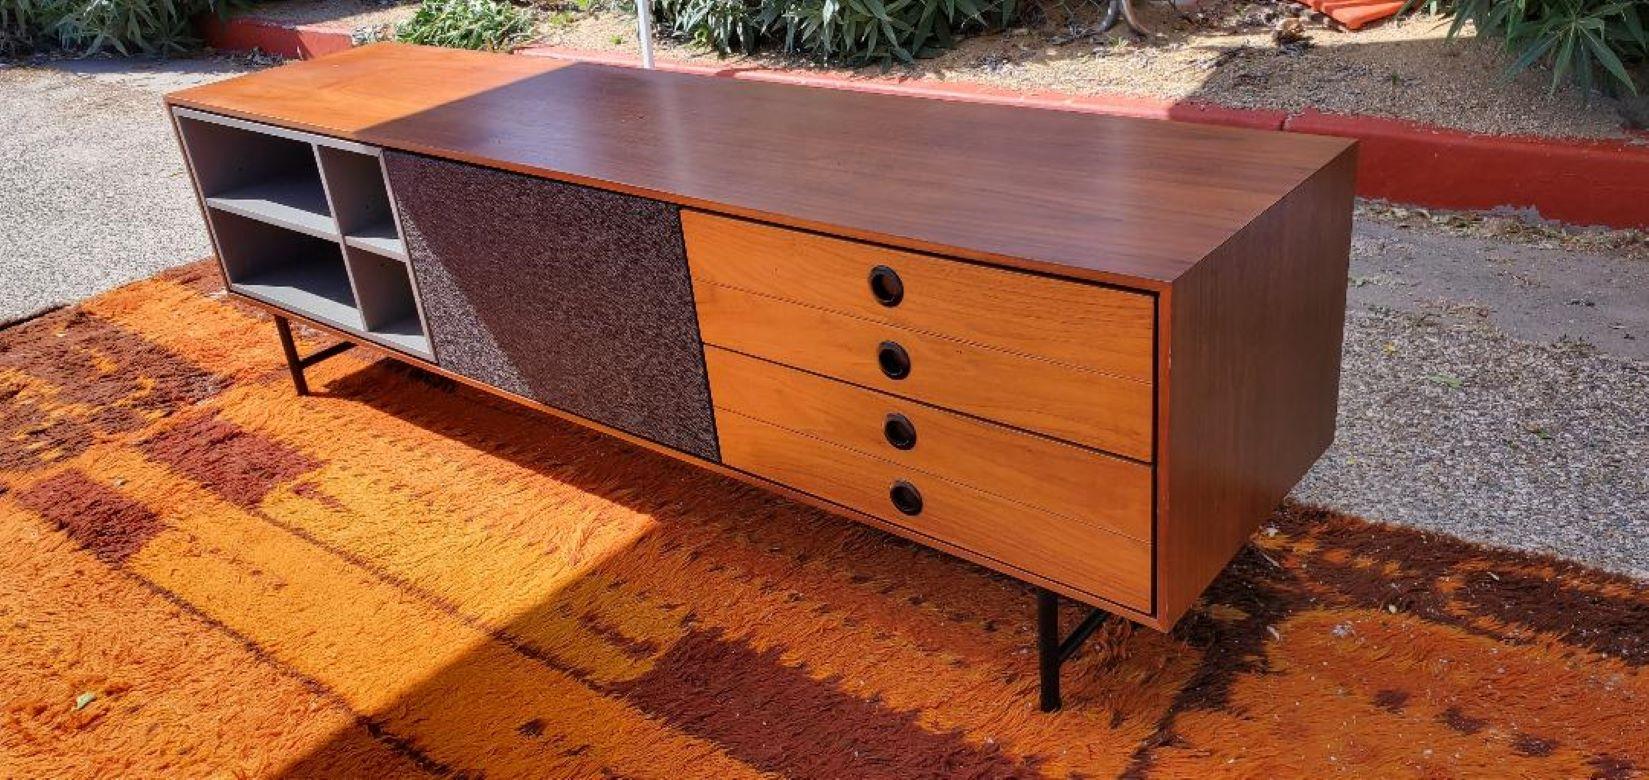 Mid Century Modern Walnut Credenza / Sideboard With Black Metal Base In Good Condition For Sale In Monrovia, CA